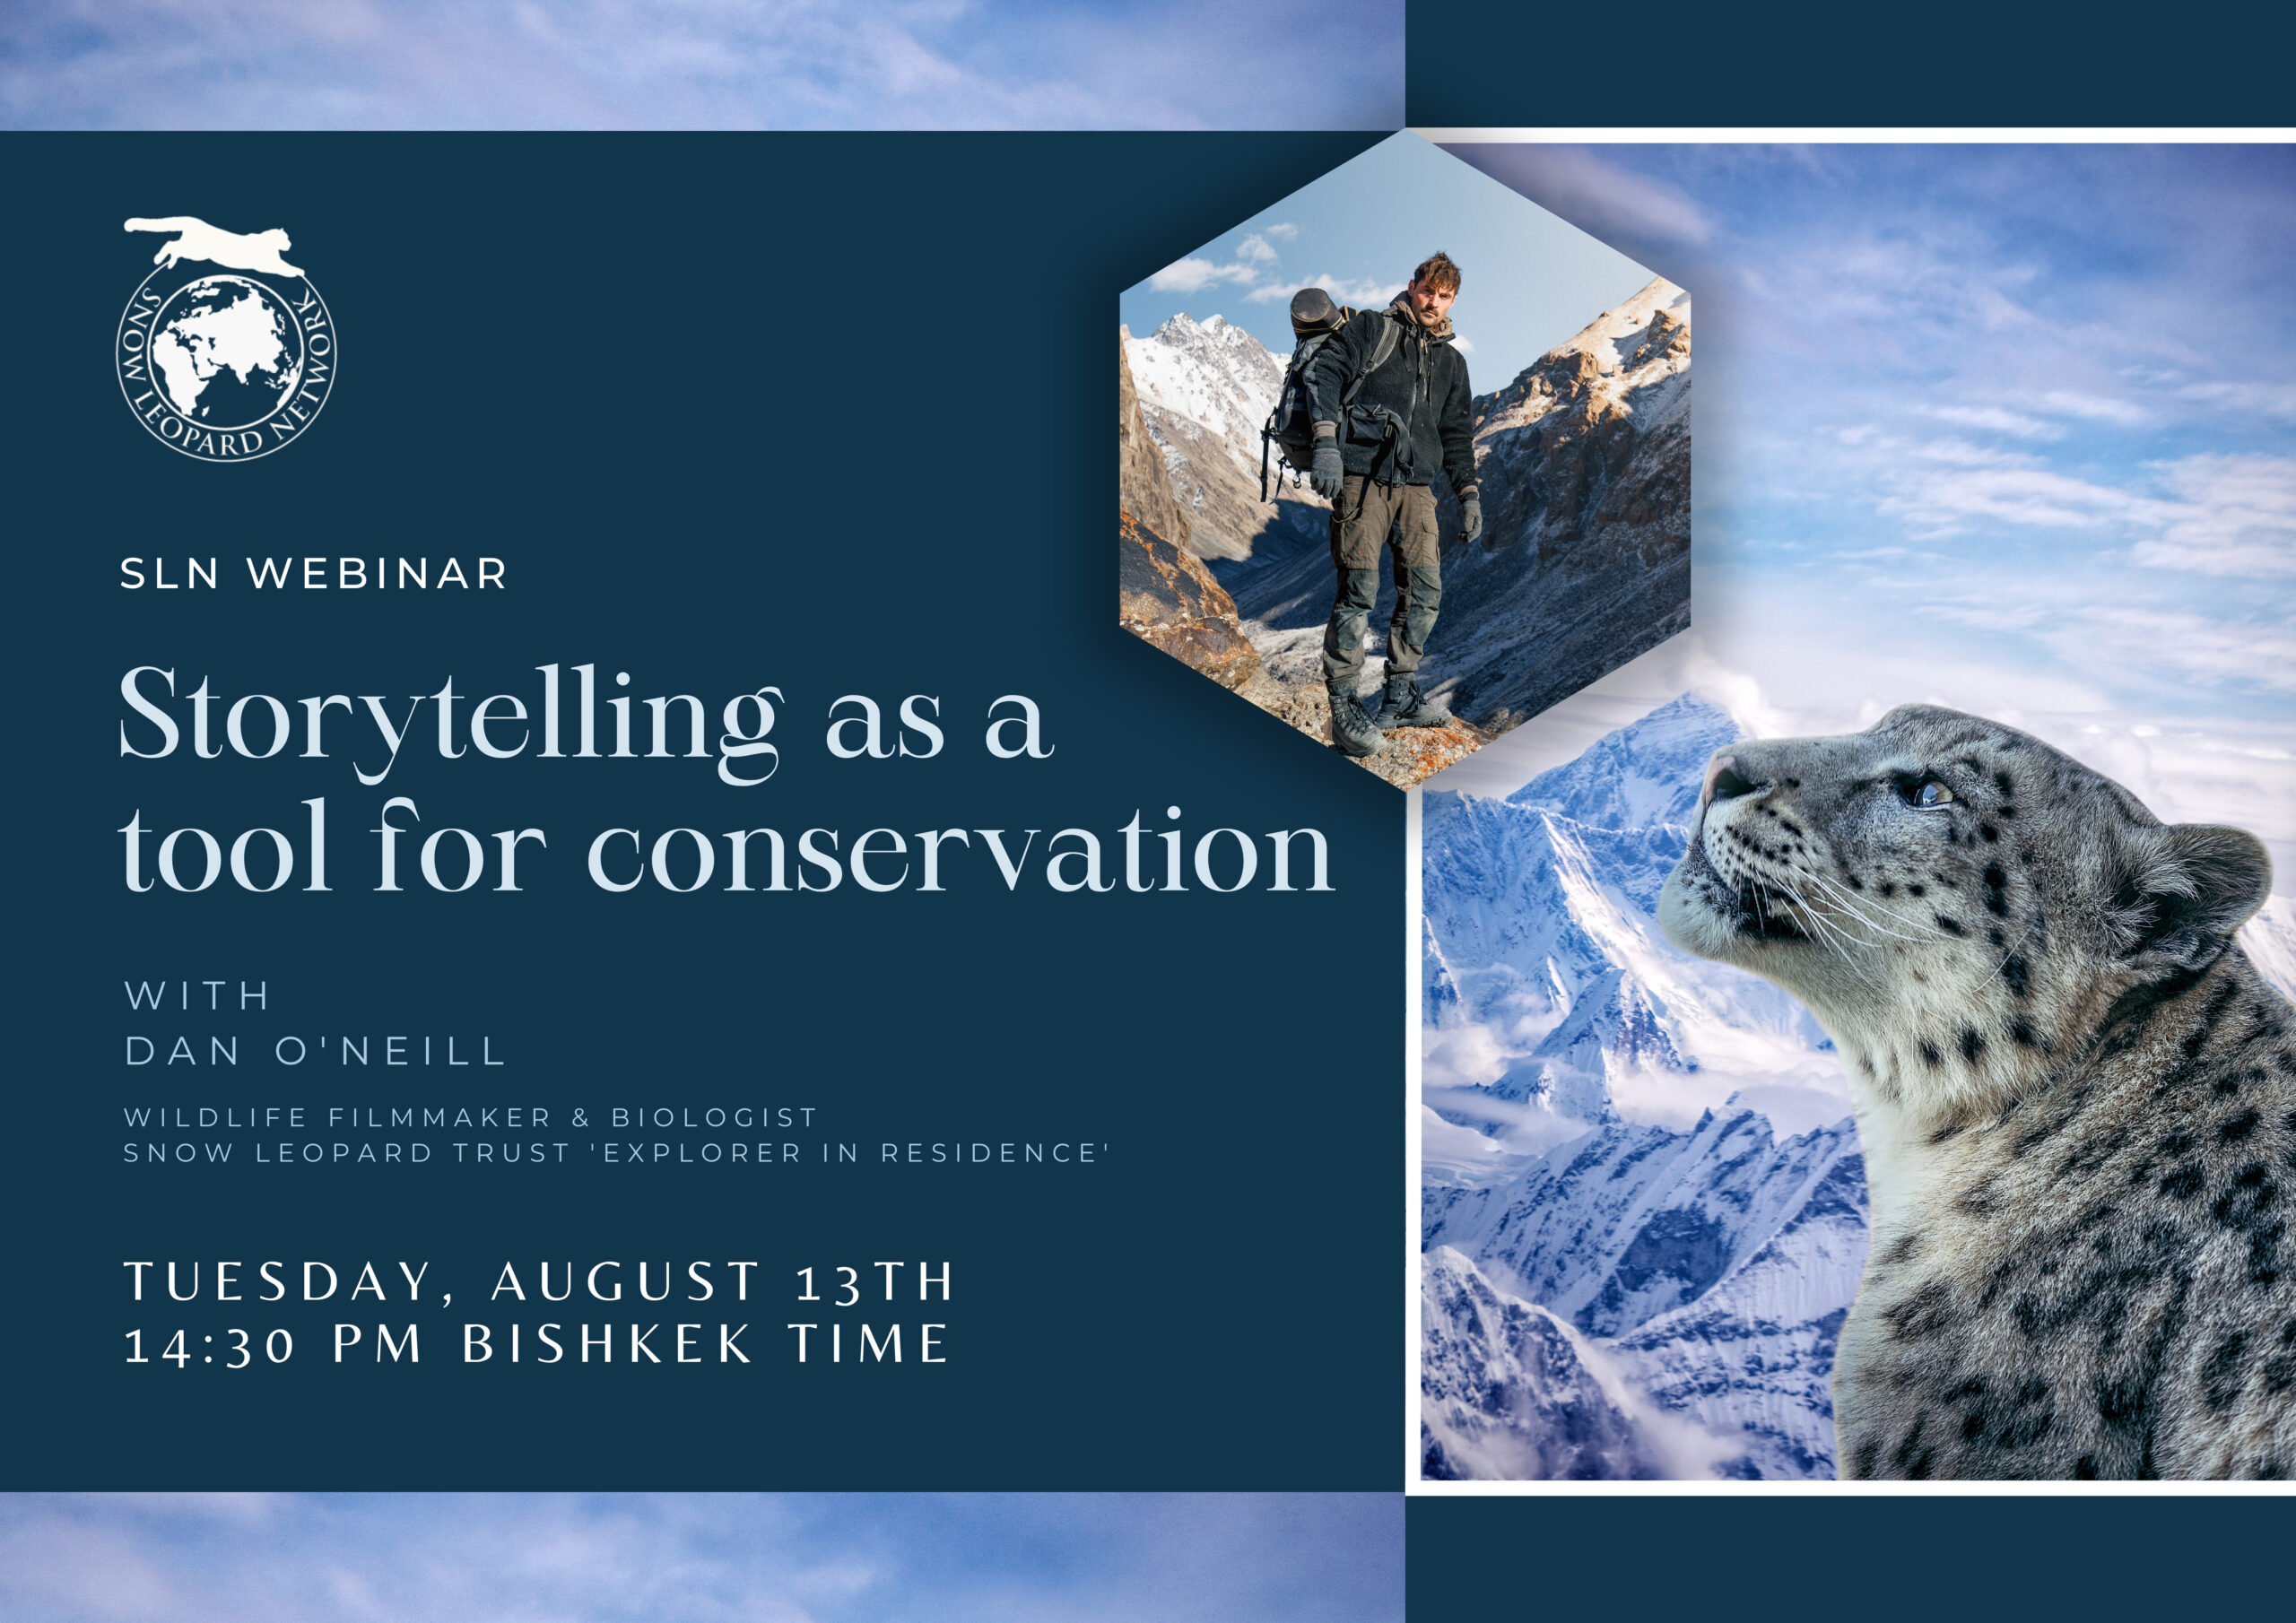 SLN Webinar: Storytelling as a tool for conservation - with Dan O'Neill